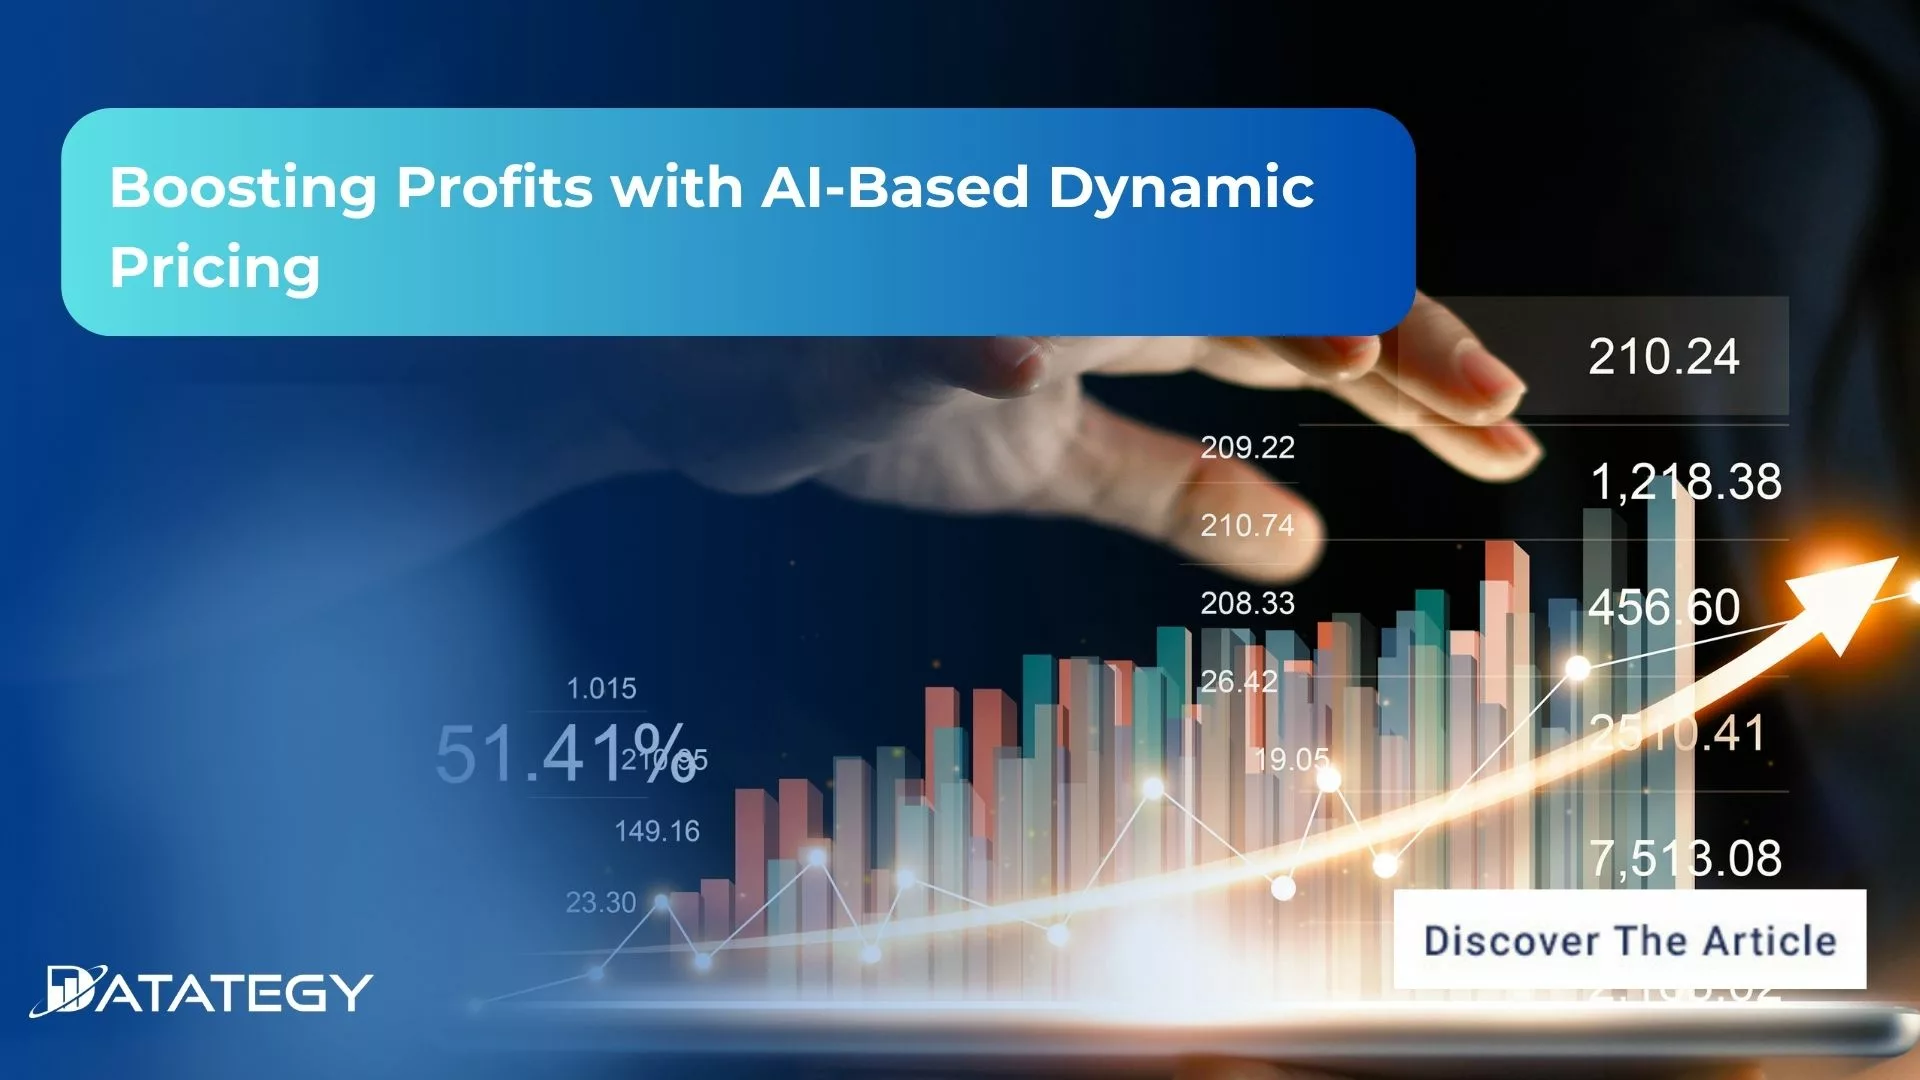 Boosting Profits with AI-Based Dynamic Pricing